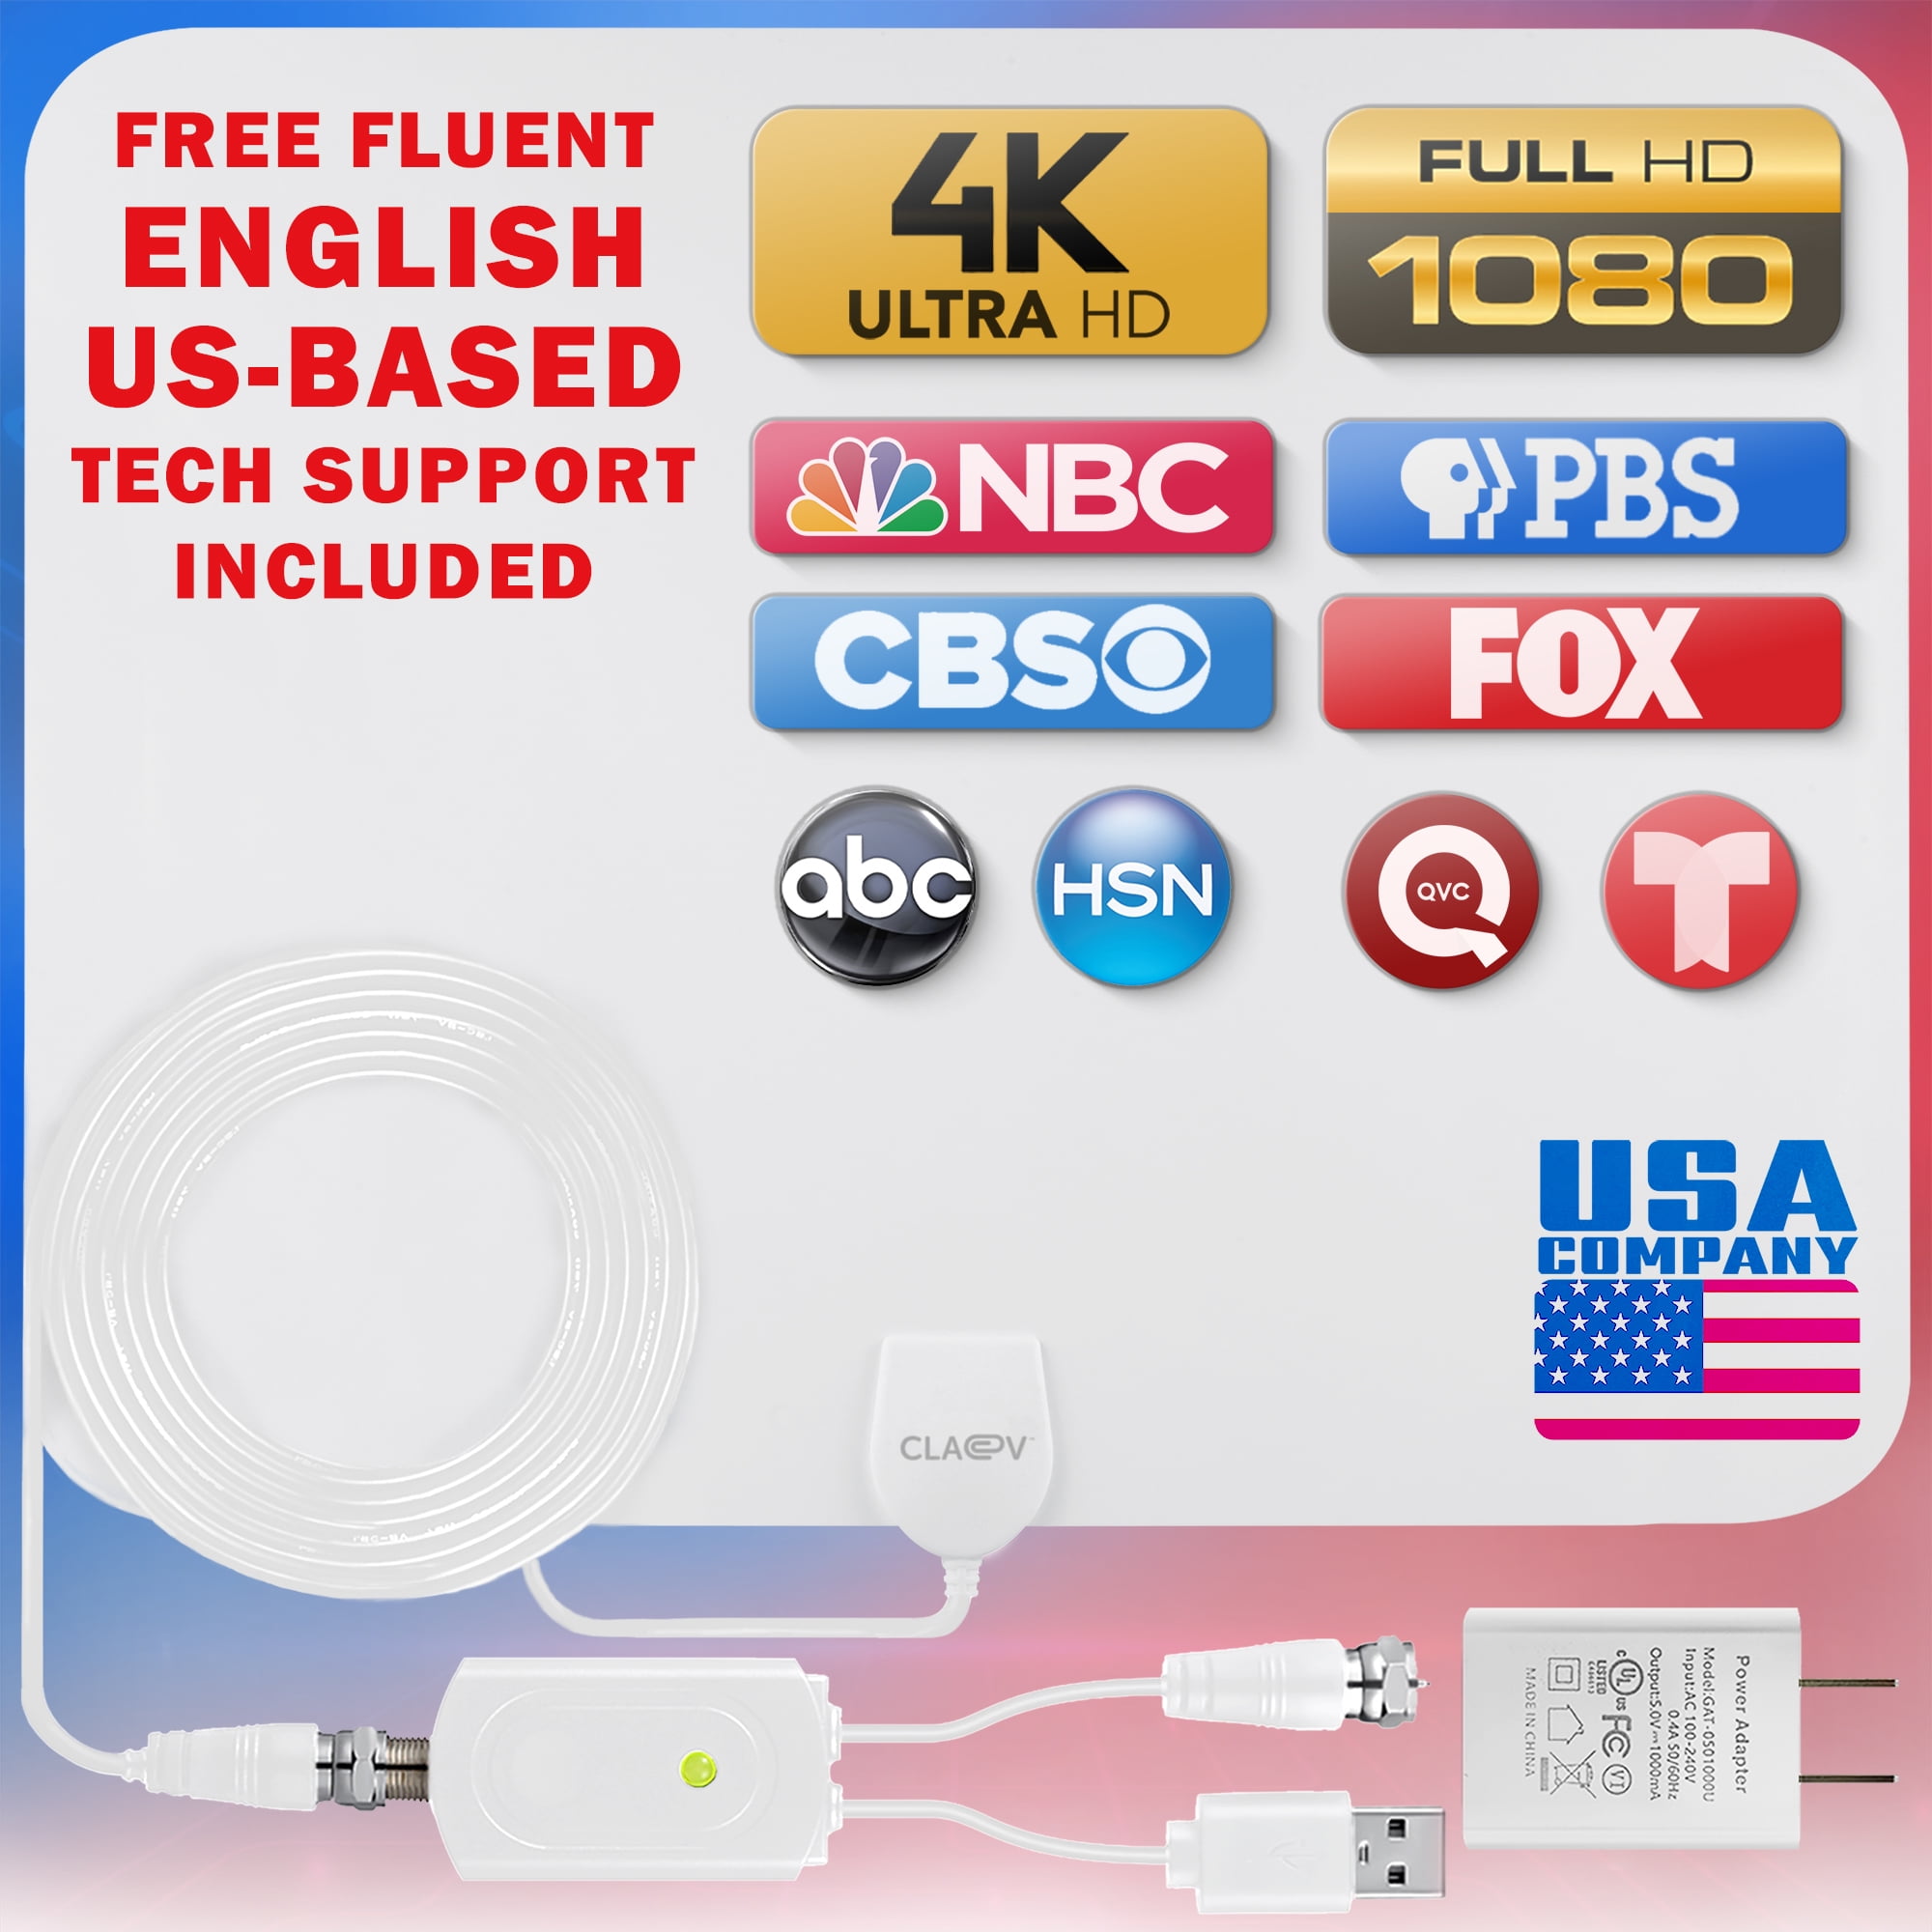 Boost Tv 300 Mile Range Hd Digital Tv Antenna 4k Support Free View Channels, Save Clearance Deals